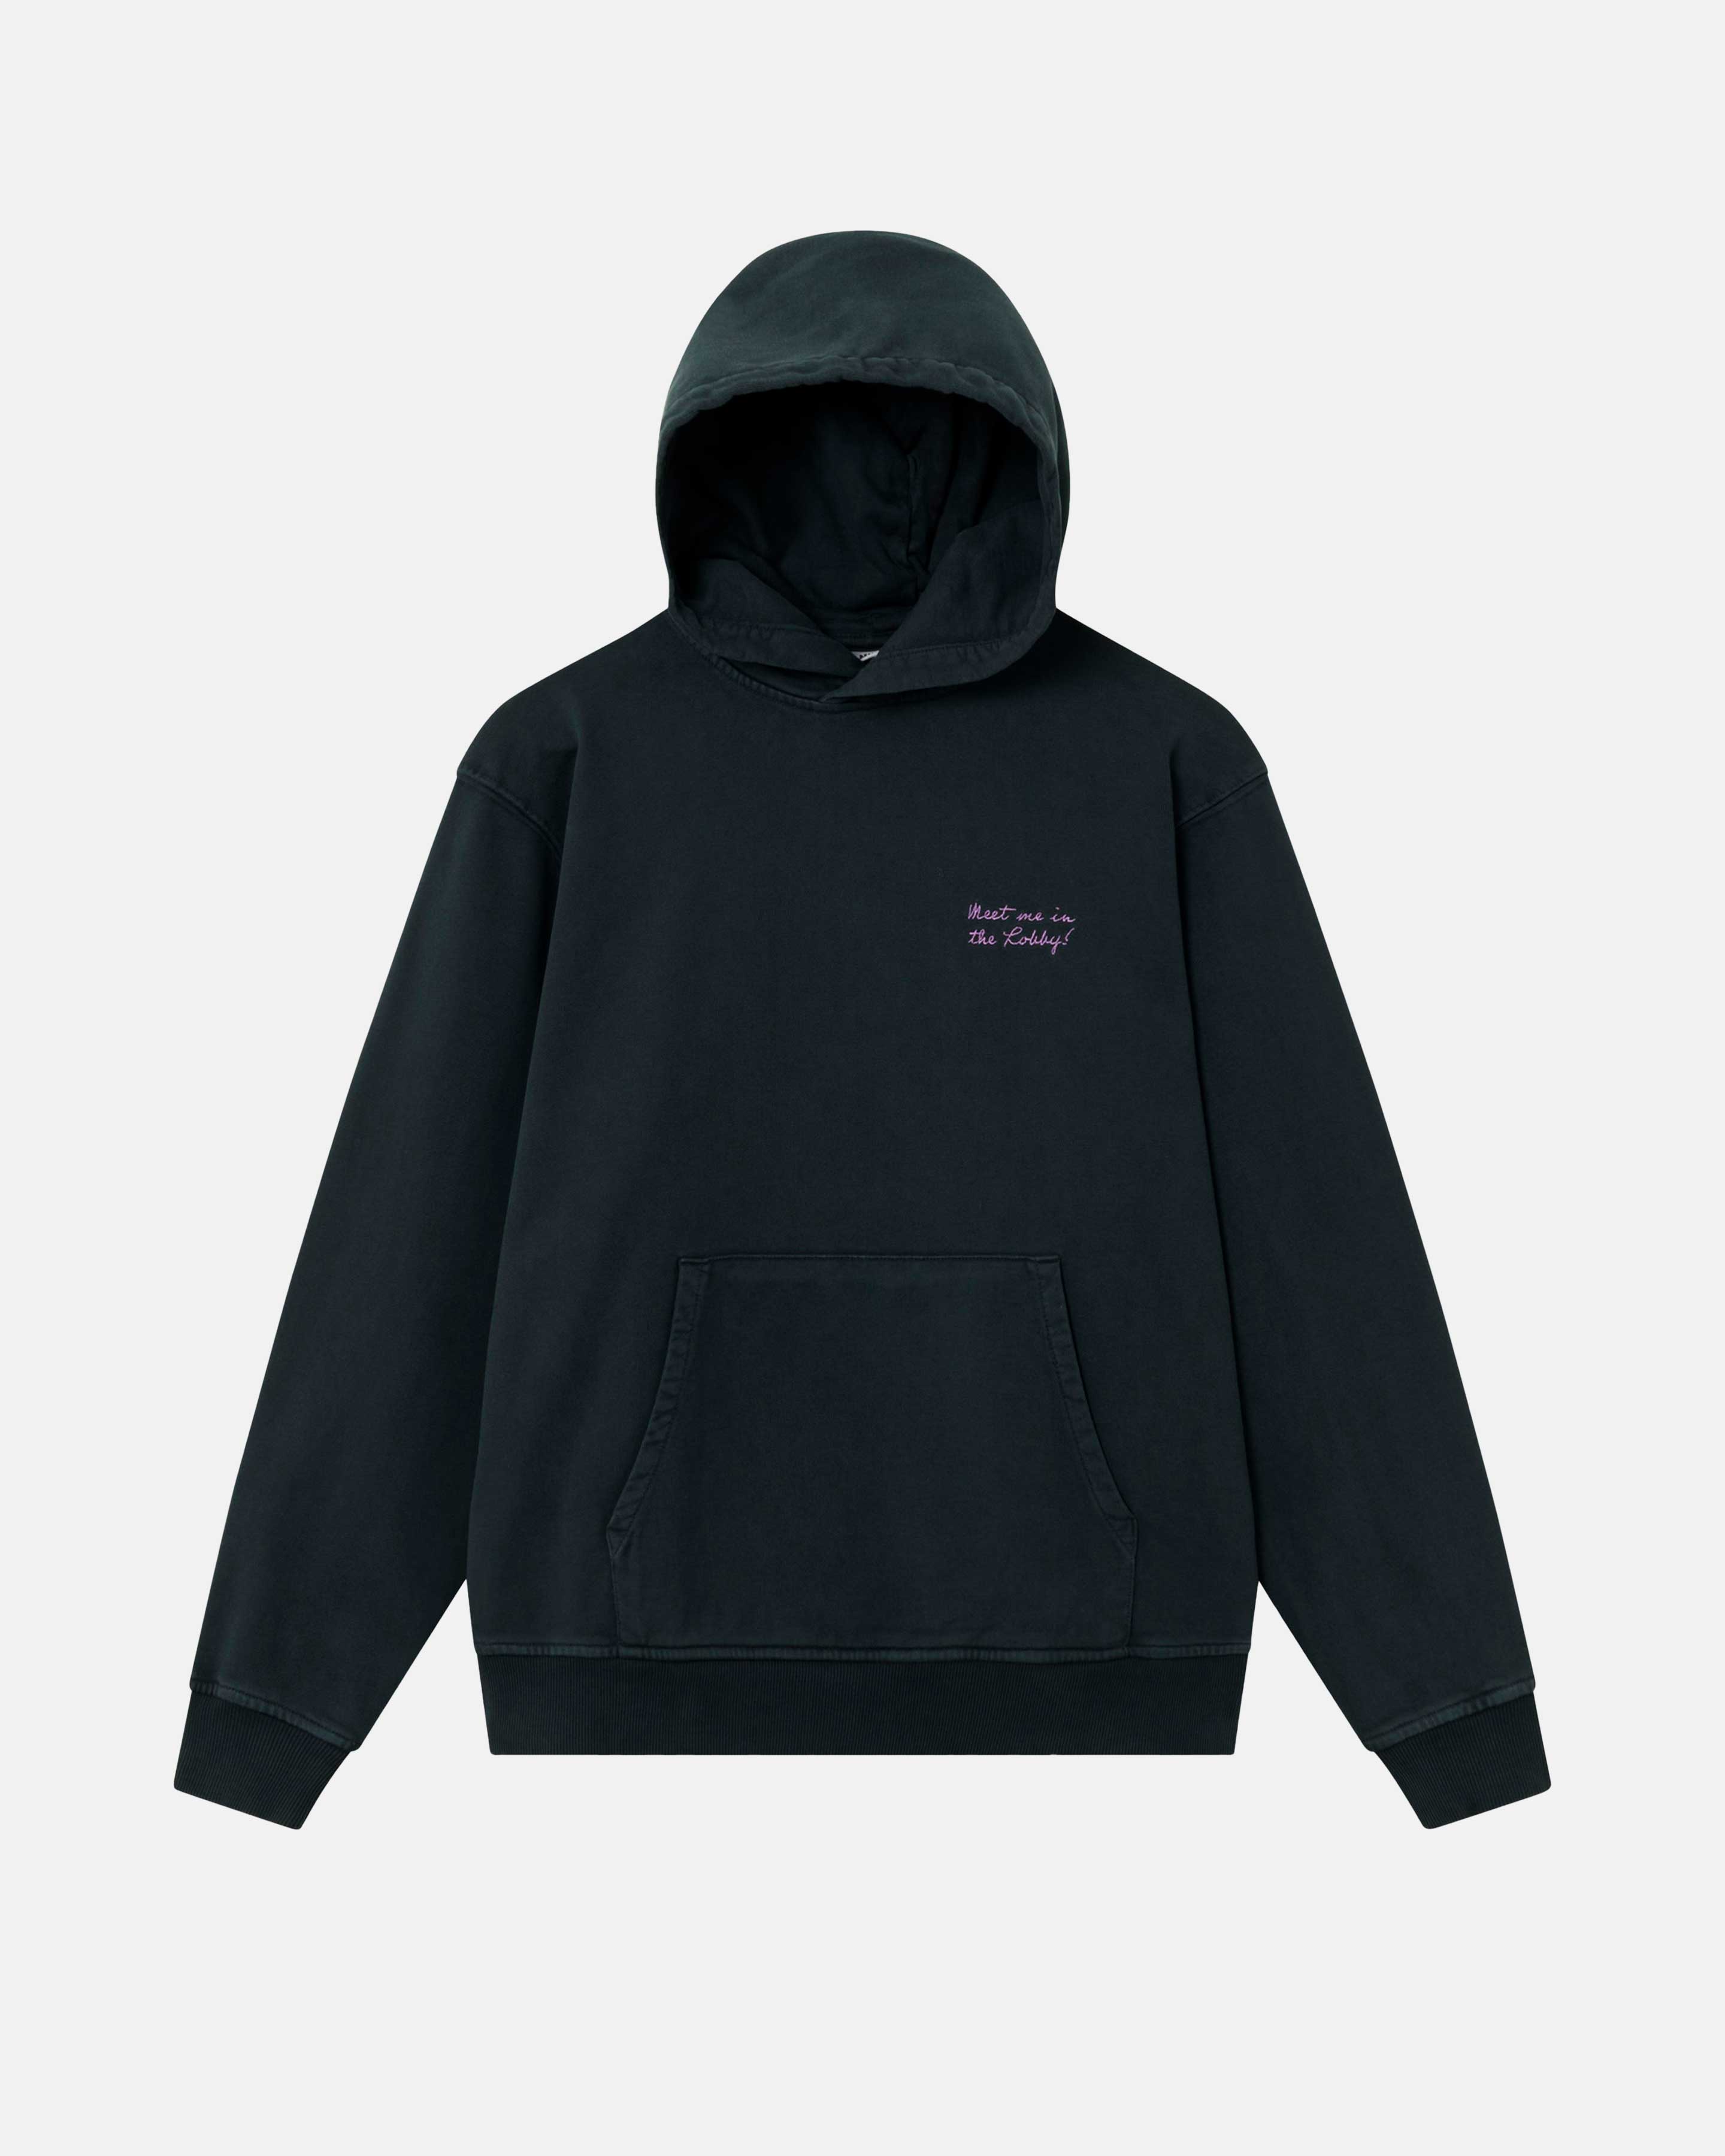 Washed black hoodie with a single front pocket and a stitched purple 'Meet me in the lobby' print on the chest.